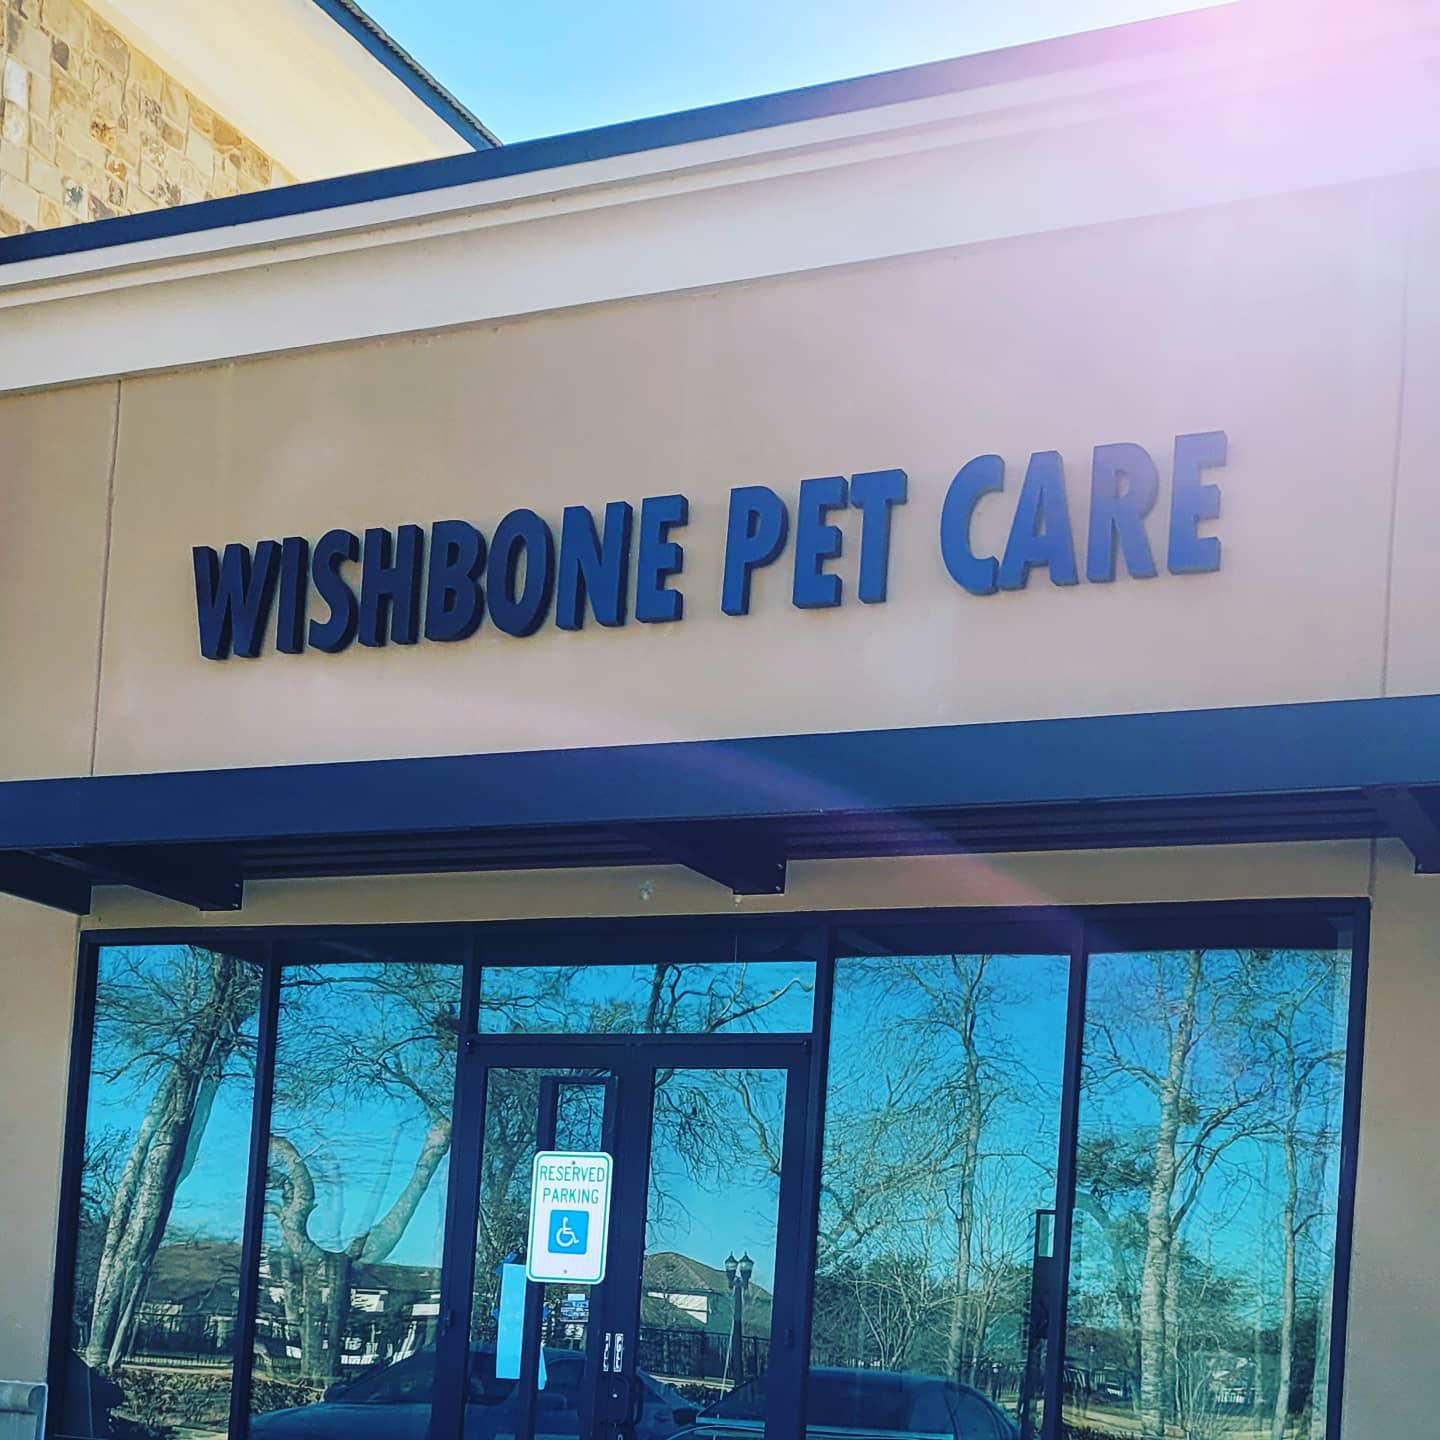 Does your pet need nutritional advice consultations? Wishbone Care Center provides access to organic, premium, and raw diets, and a wide range of holistic supplements for companion animals.